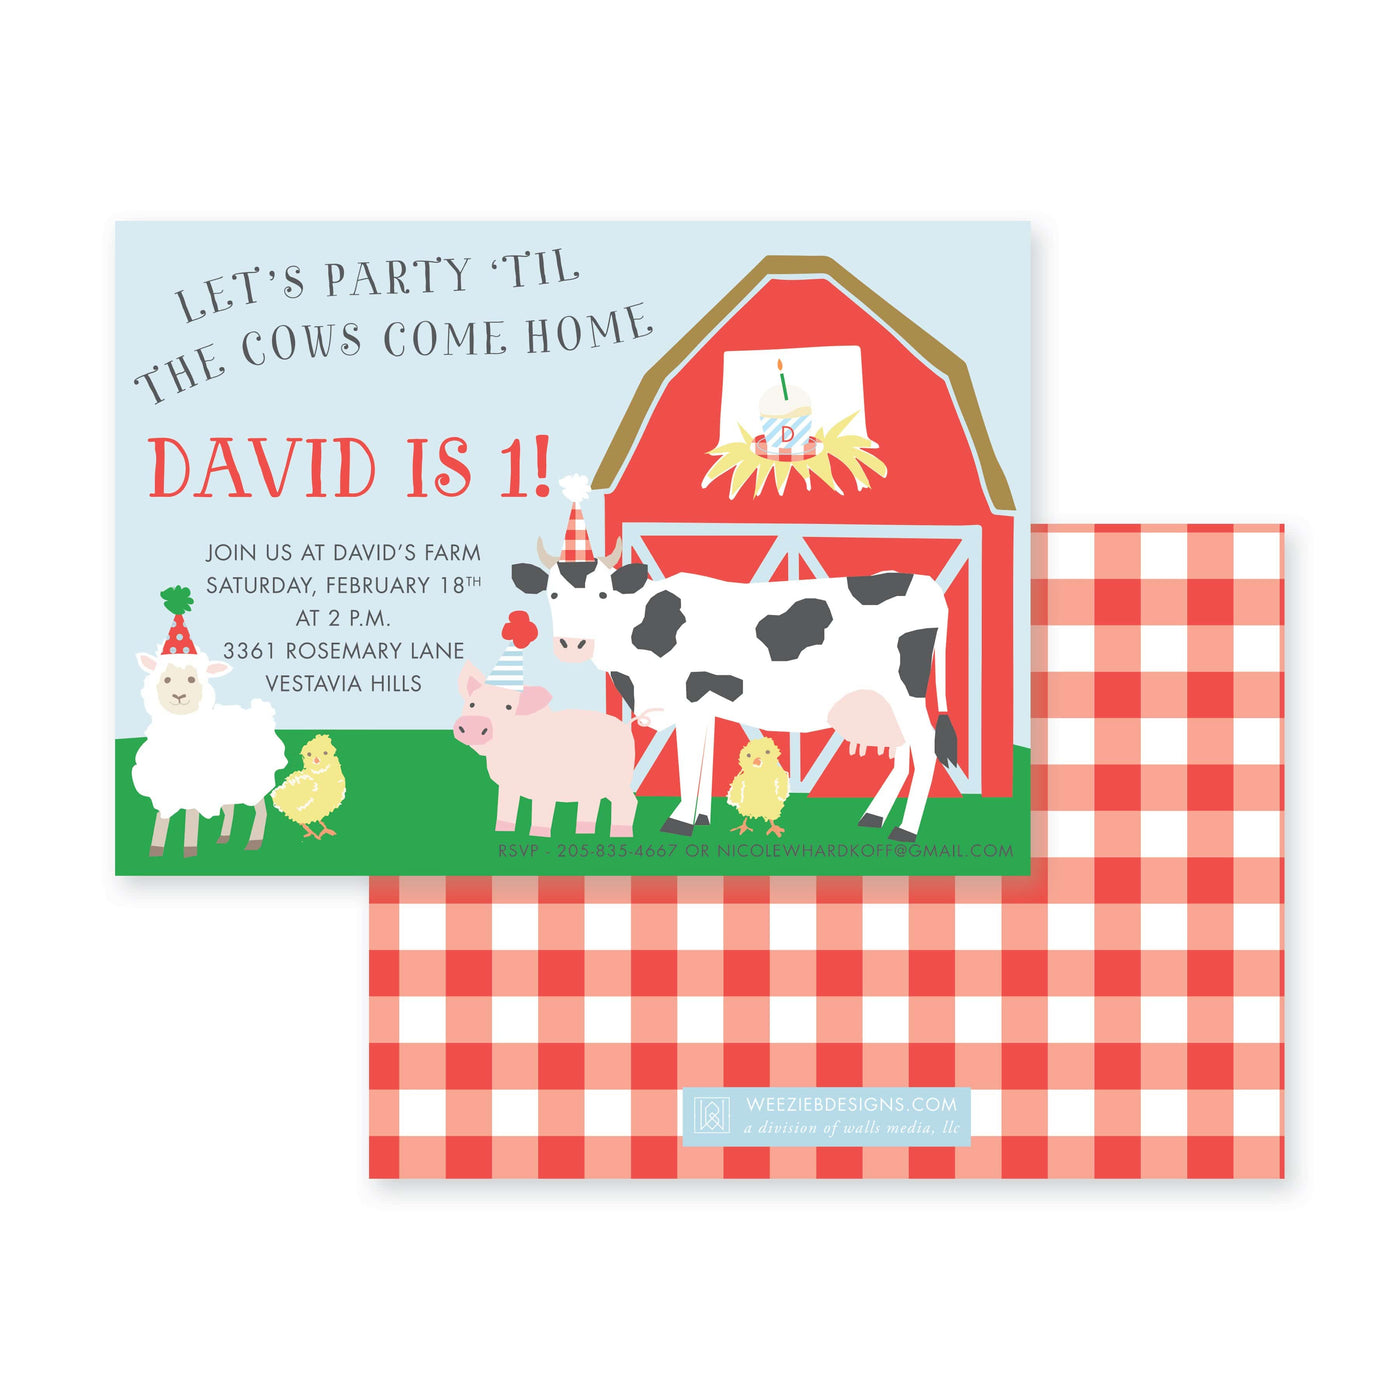 Weezie B. Designs | Party 'til the Cows Come Home Birthday Invitation